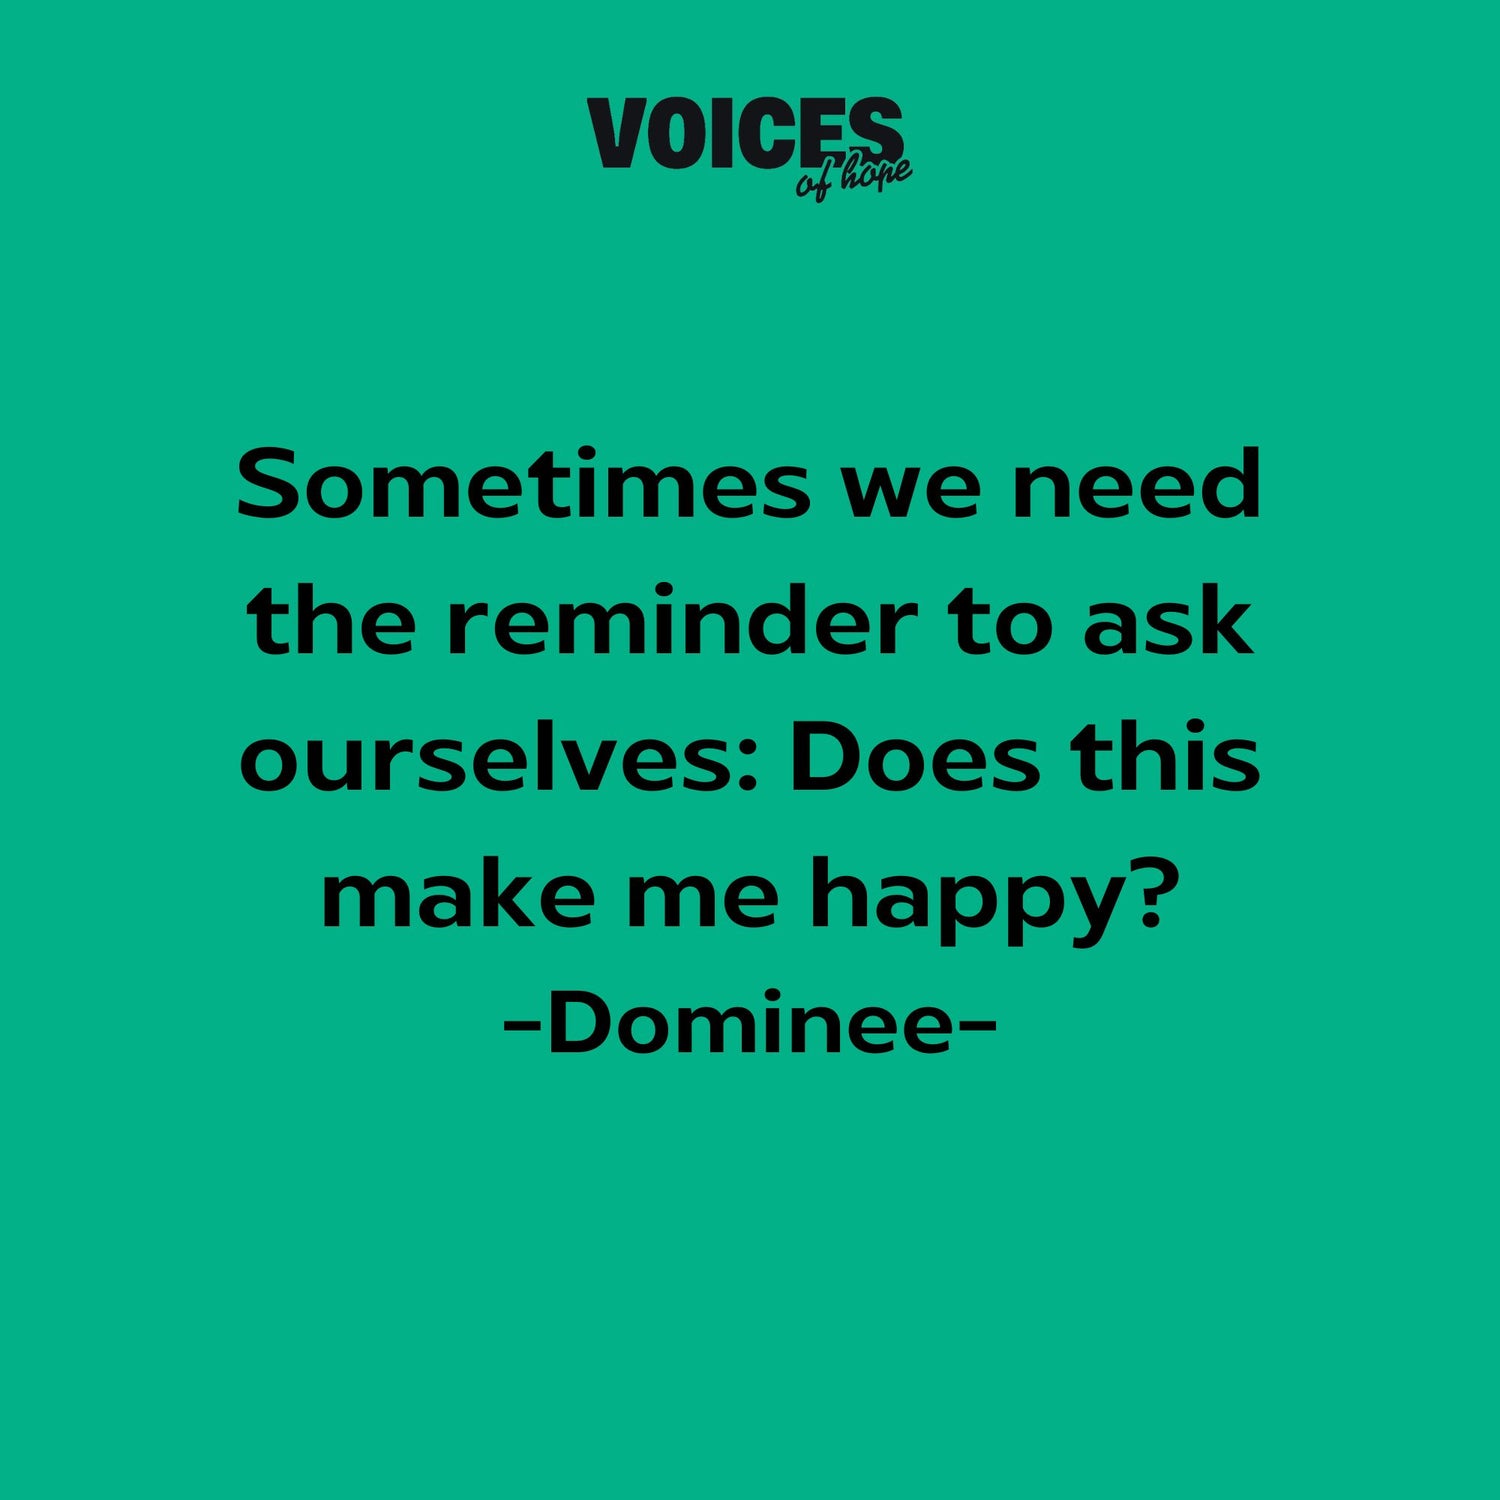 Green background with black writing that reads: "sometimes we need to remember to ask ourselves: Does this make me happy? Dominee."